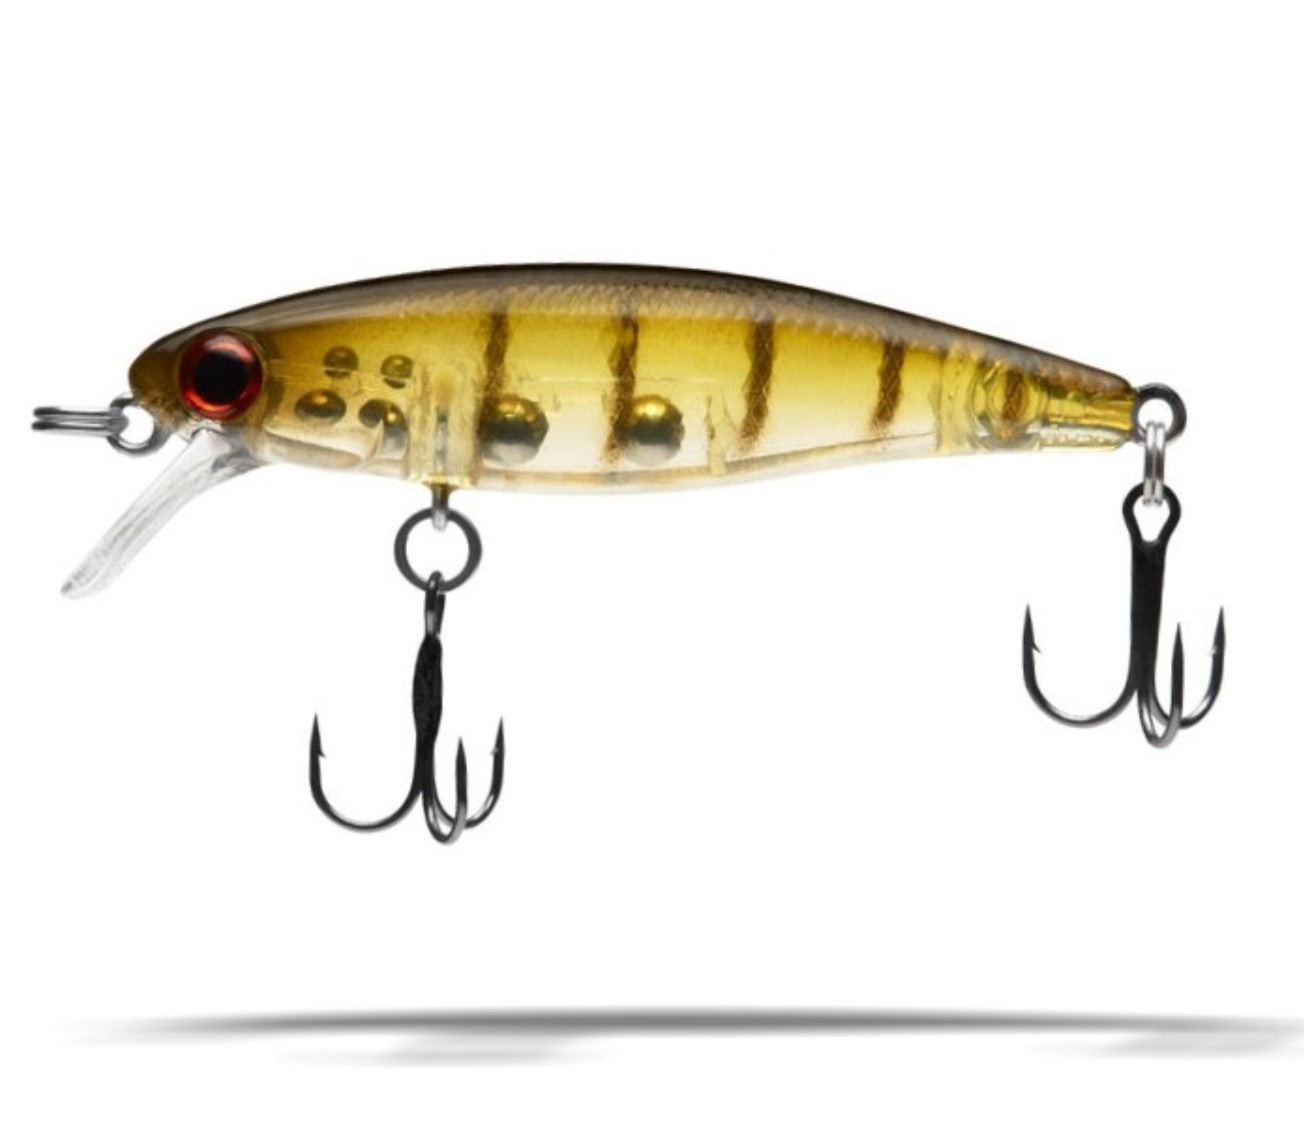 Dynamic Lures HD Trout - Ghost Perch